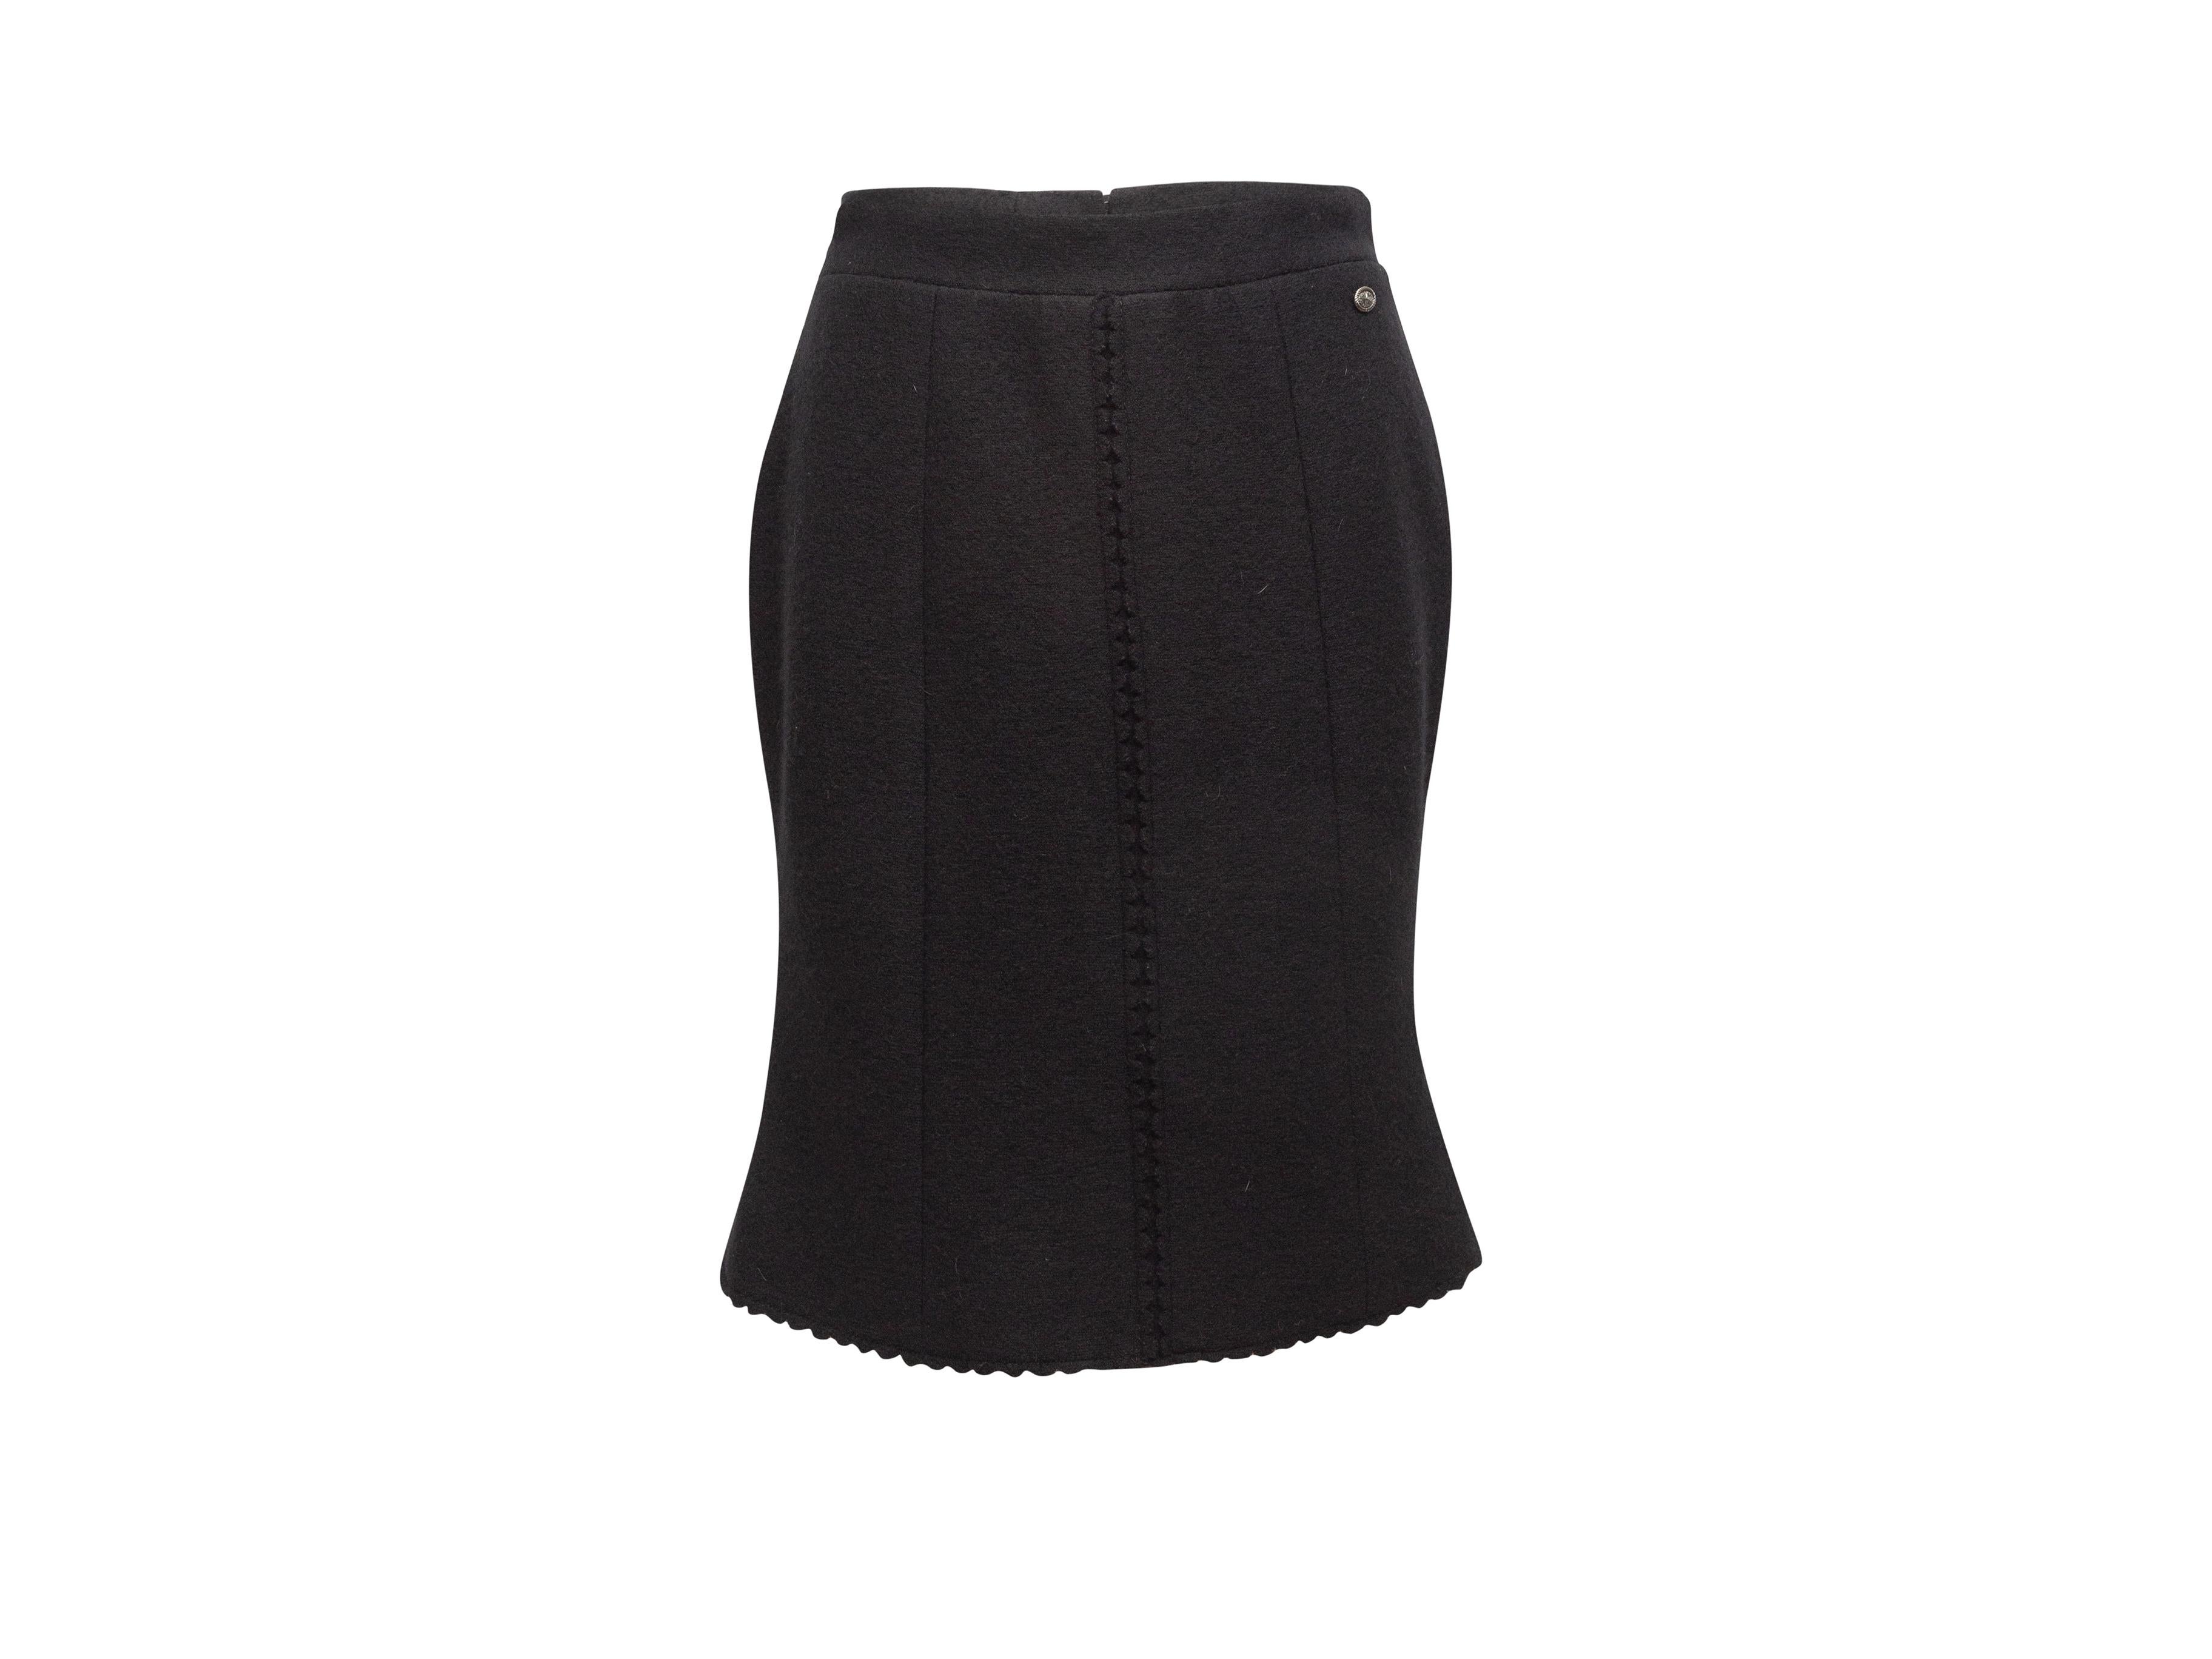 Product details: Black wool knee-length skirt by Chanel. Scalloped edges. Zip closure at center back. Designer size 40. 31